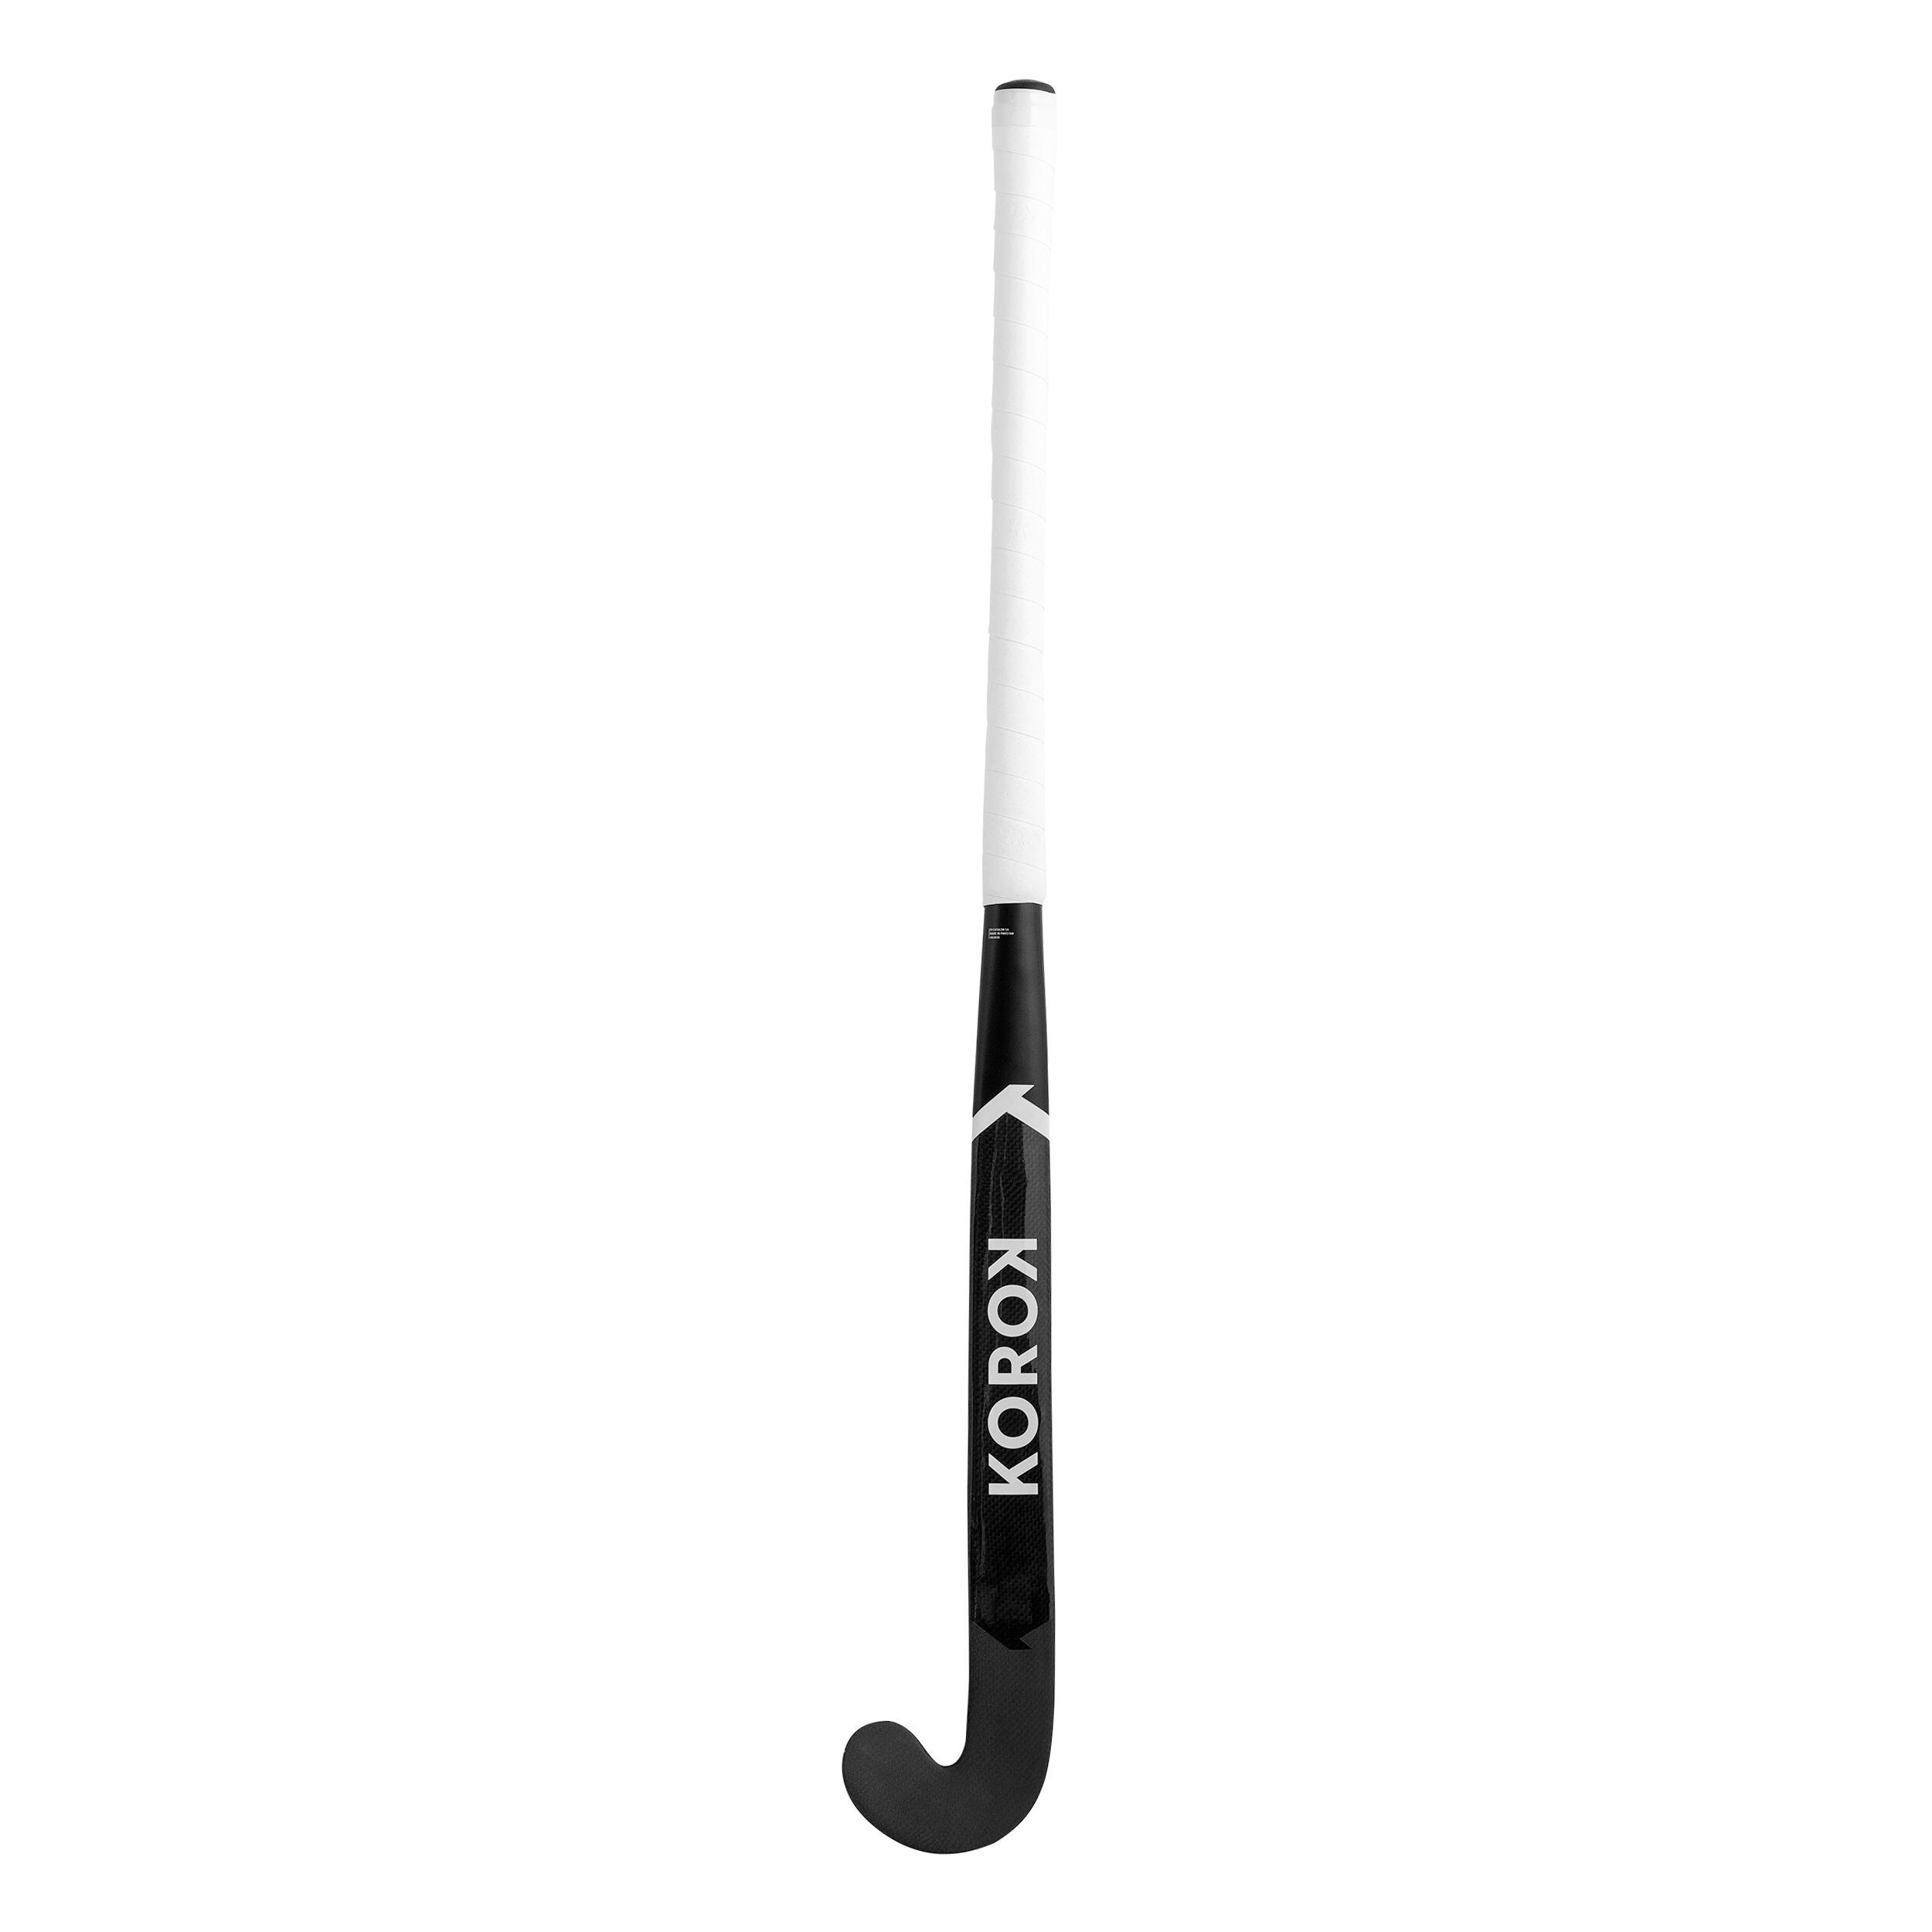 Adult Advanced 50% Carbon Low Bow Indoor Hockey Stick FH950 - Black/White 6/10